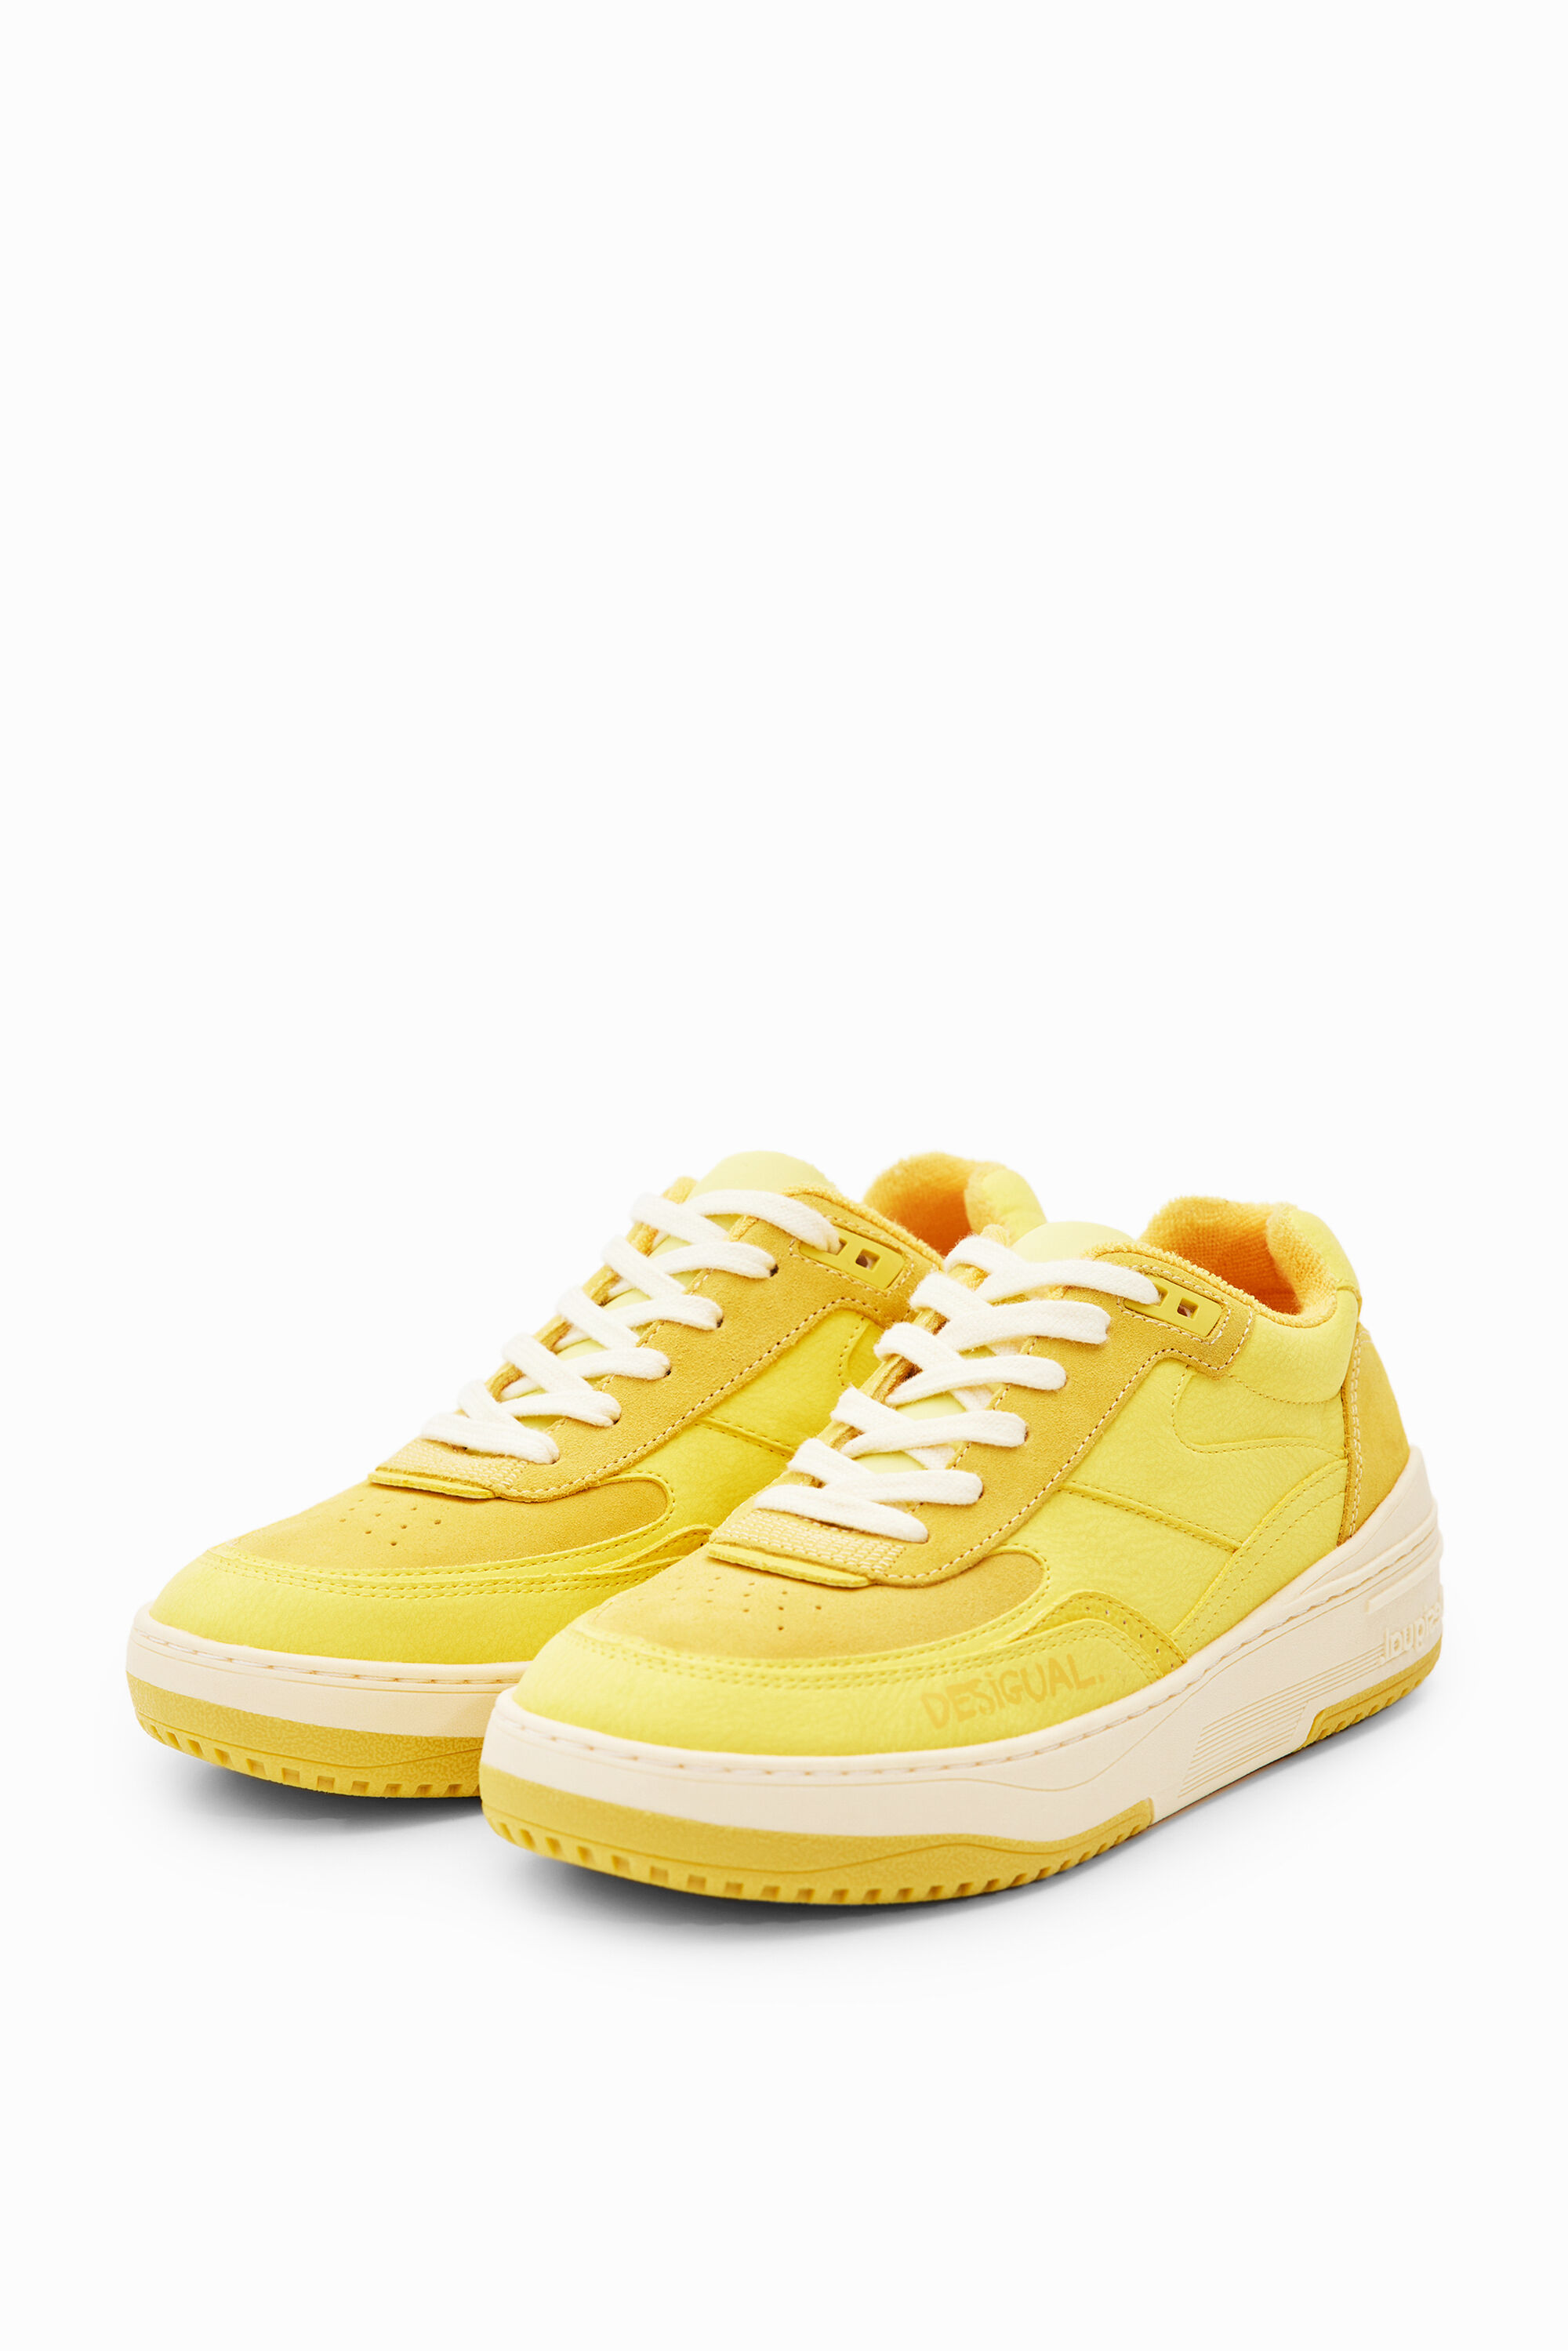 Retro chunky patchwork sneakers - YELLOW - 39